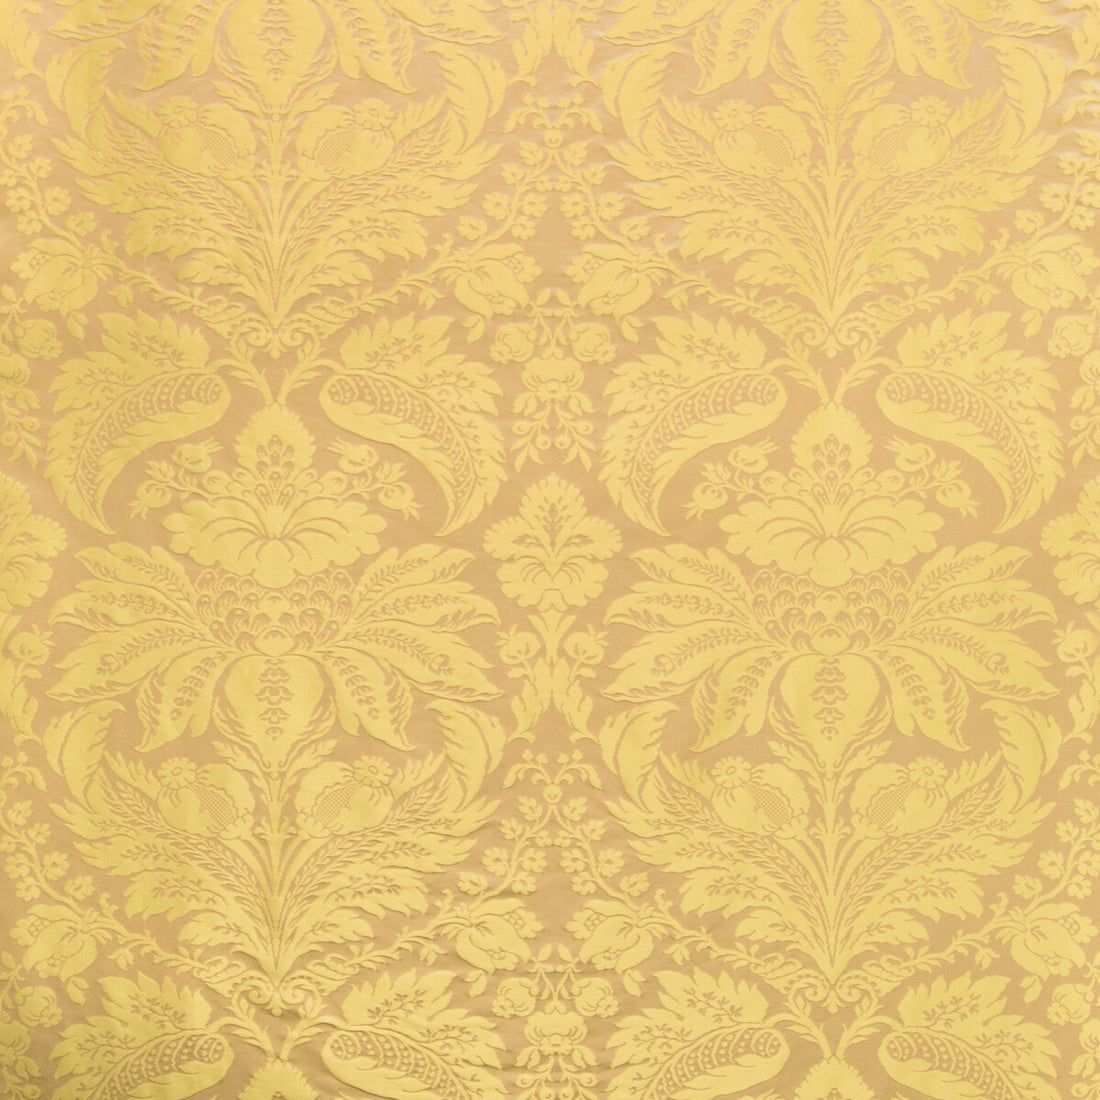 Damask Pierre fabric in antique color - pattern 8013188.164.0 - by Brunschwig &amp; Fils in the B&amp;F Showroom Exclusive 2019 collection